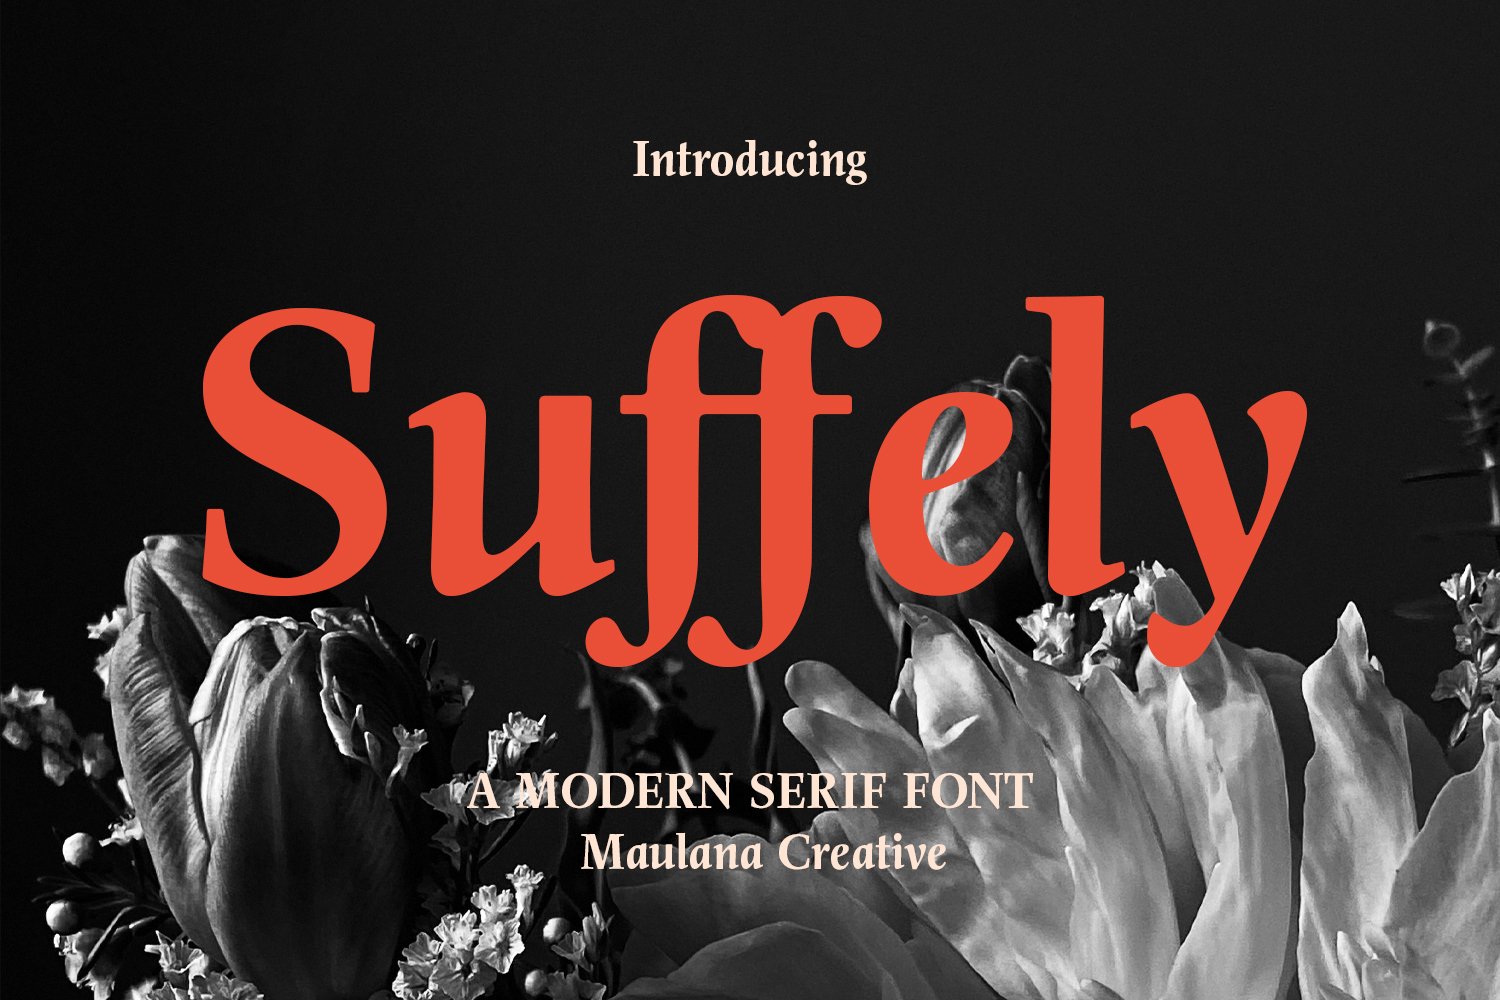 Suffely Classic Serif Font cover image.